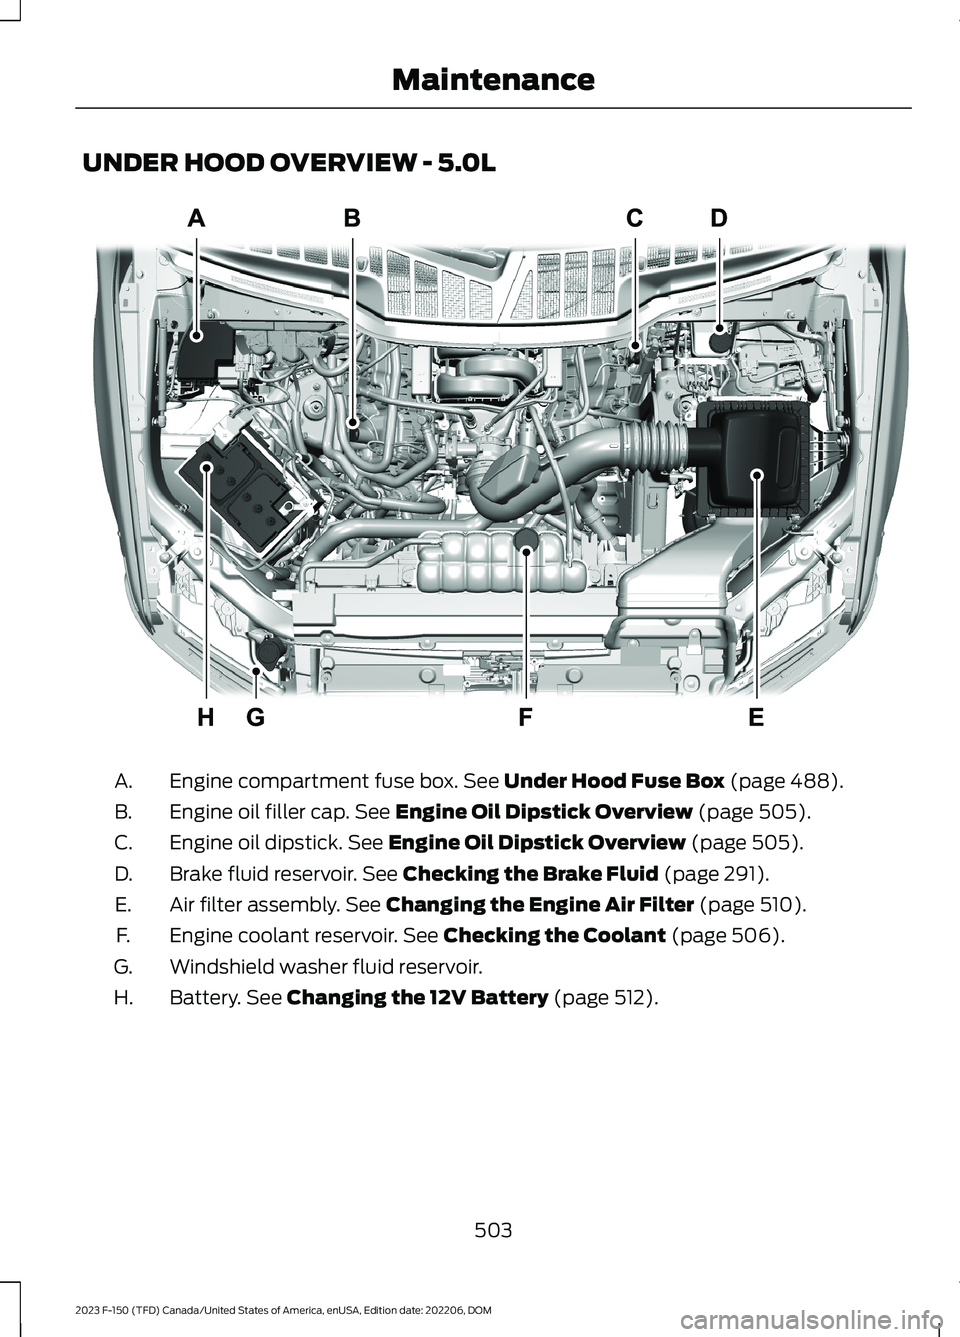 FORD F150 2023  Owners Manual UNDER HOOD OVERVIEW - 5.0L
Engine compartment fuse box. See Under Hood Fuse Box (page 488).A.
Engine oil filler cap. See Engine Oil Dipstick Overview (page 505).B.
Engine oil dipstick. See Engine Oil 